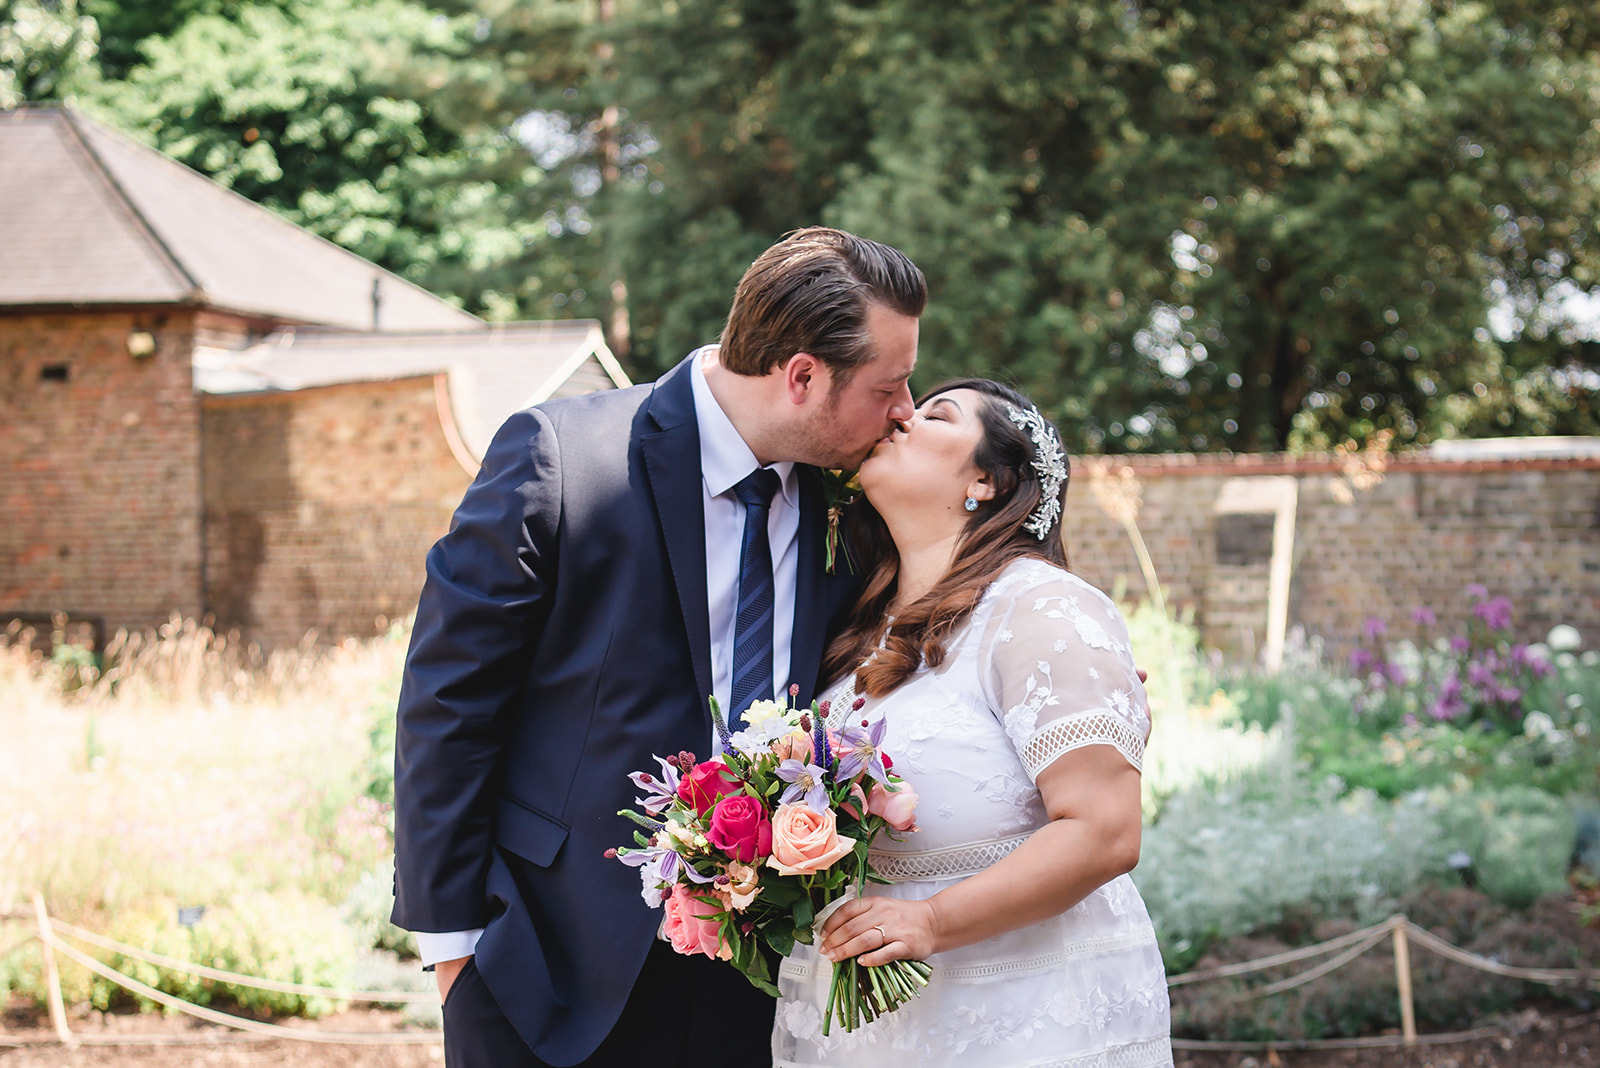 Nikita and Chris's share kiss during the wedding ceremony at the Fulham Palace